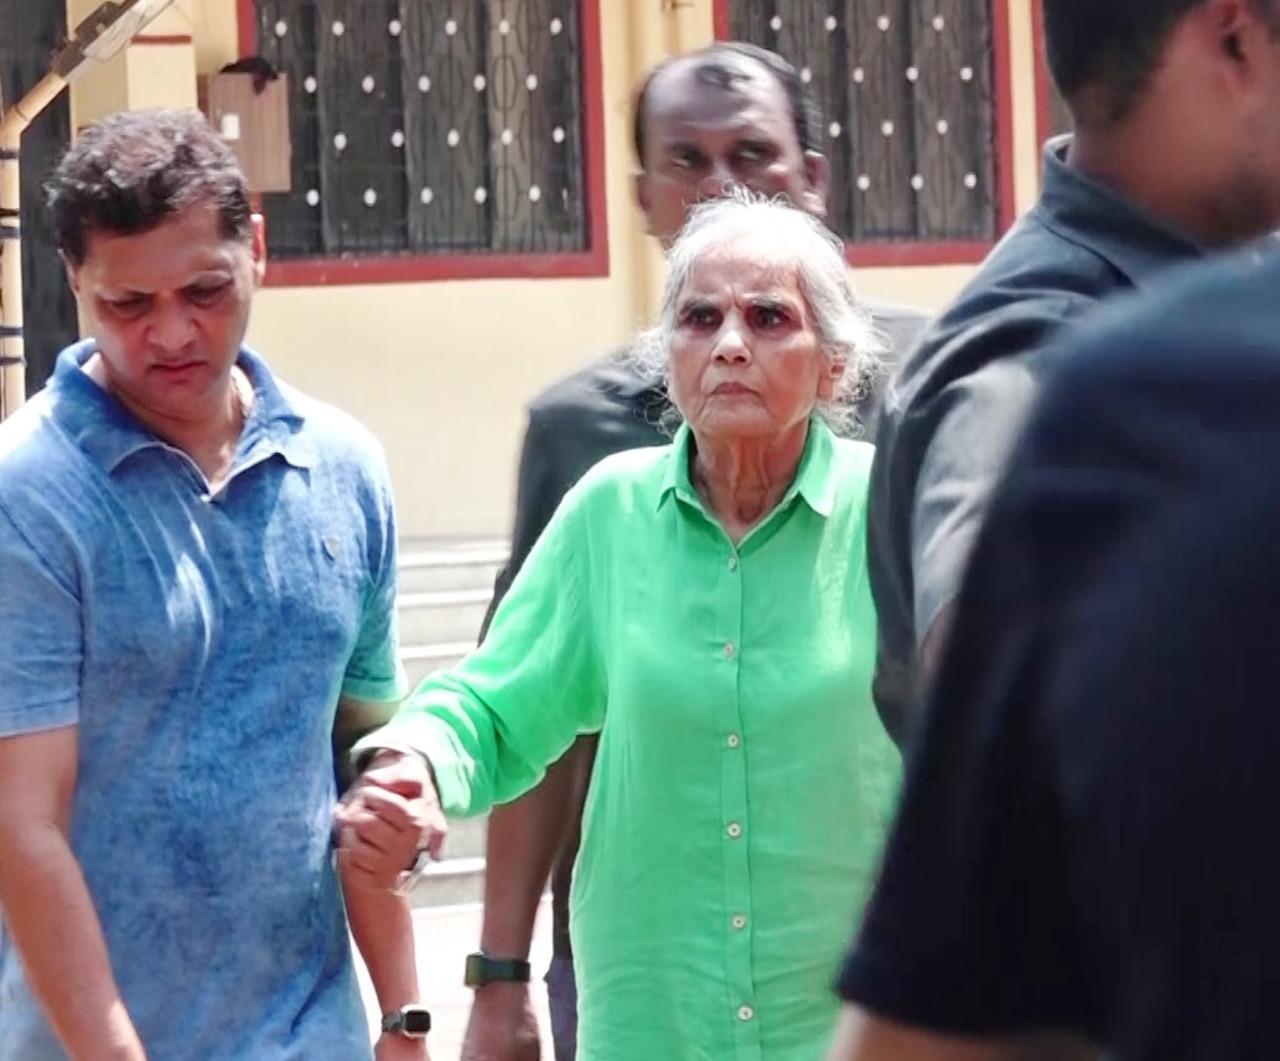 Salman Khan's mother Salma Khan at a polling booth in the city